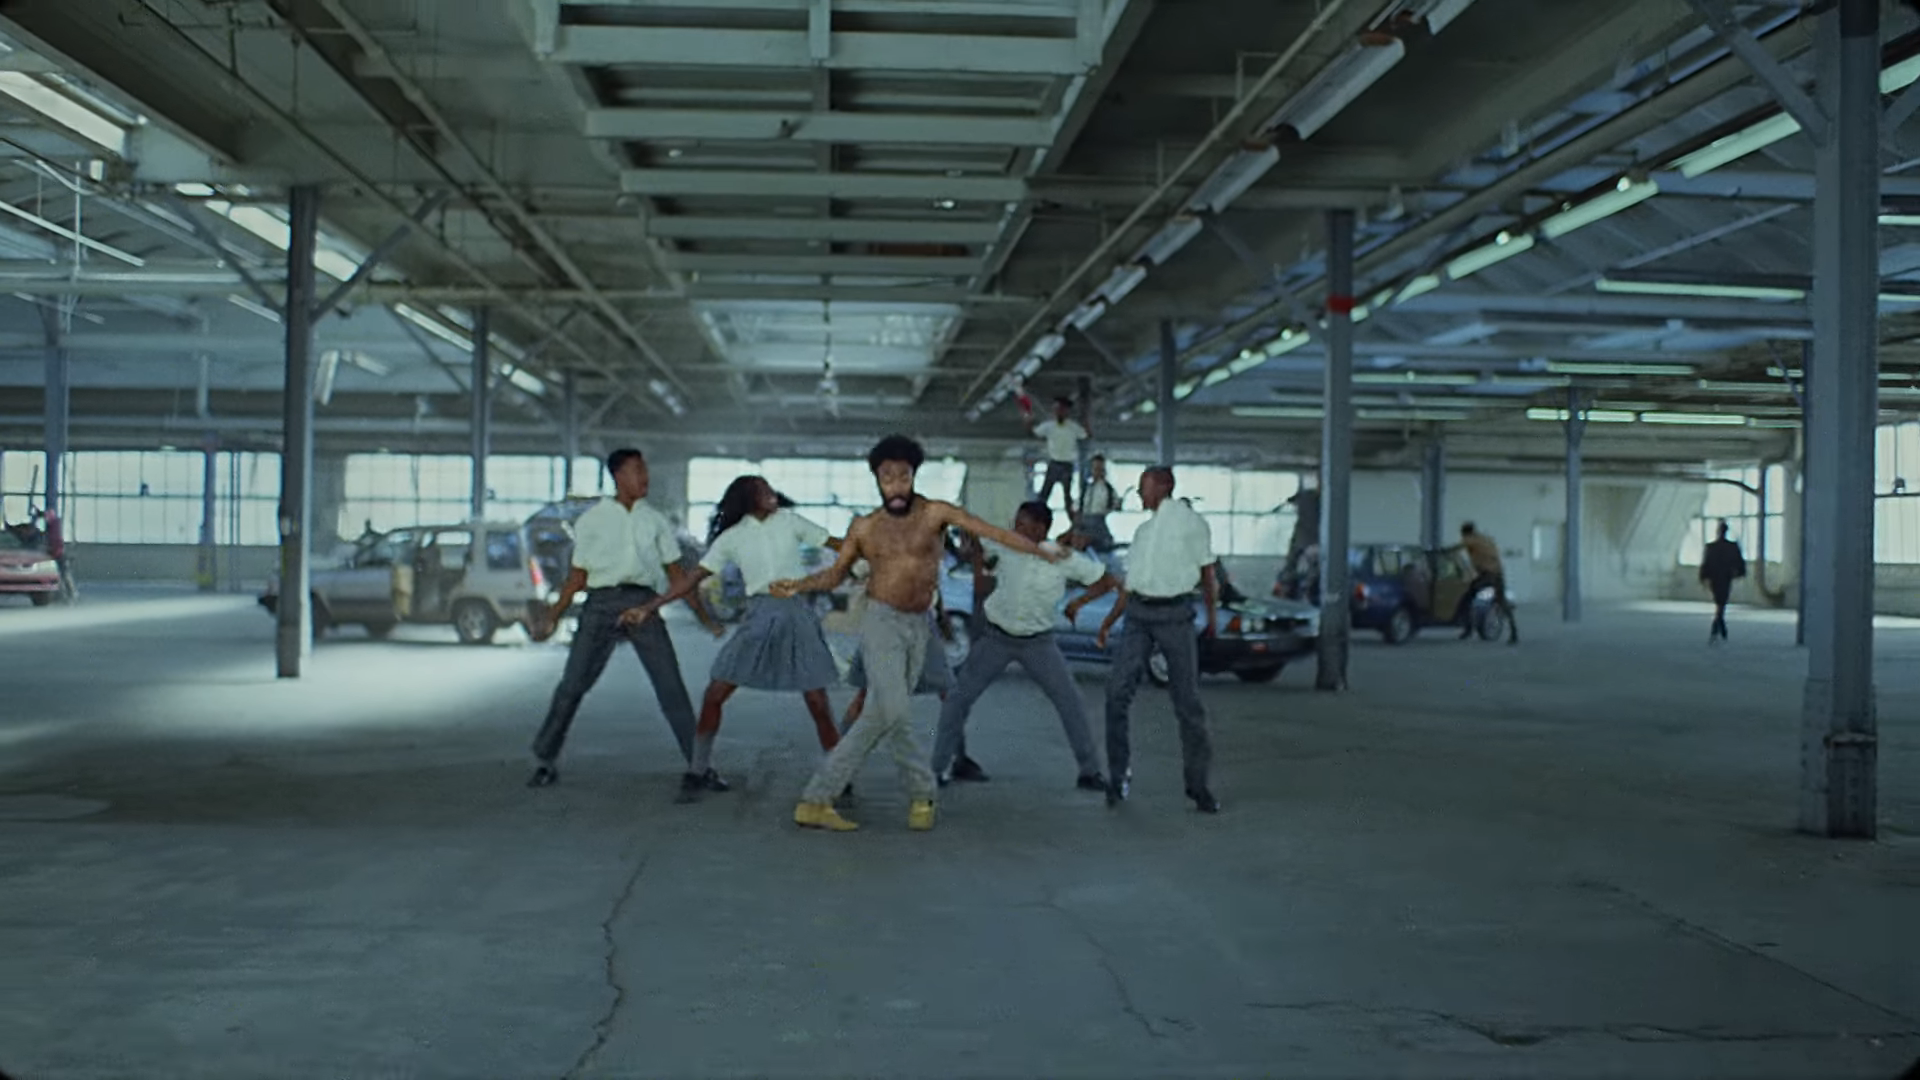 Why "This is America" Reached number 1